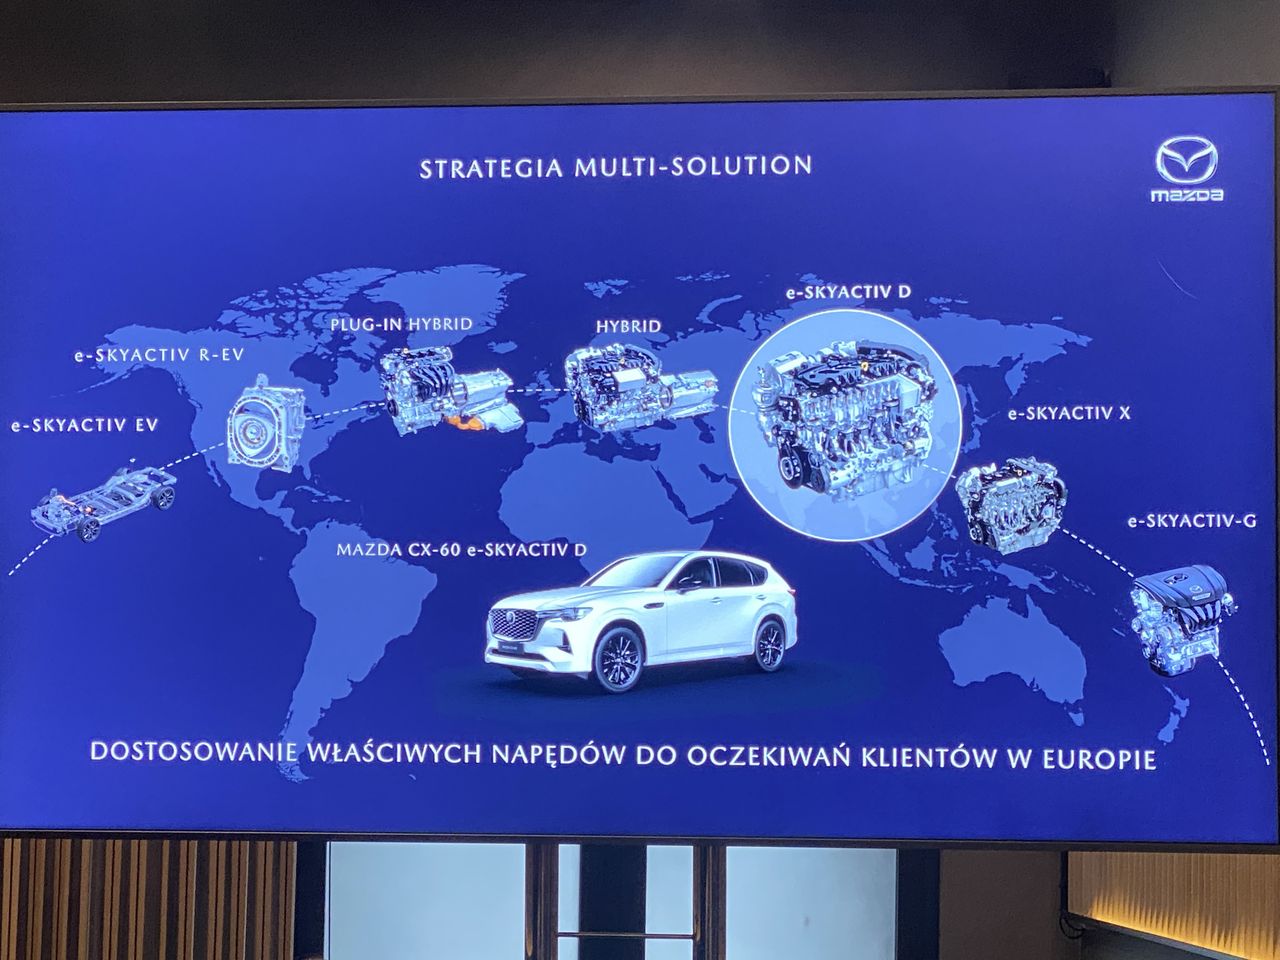 Mazda strategy "Multiple solution"